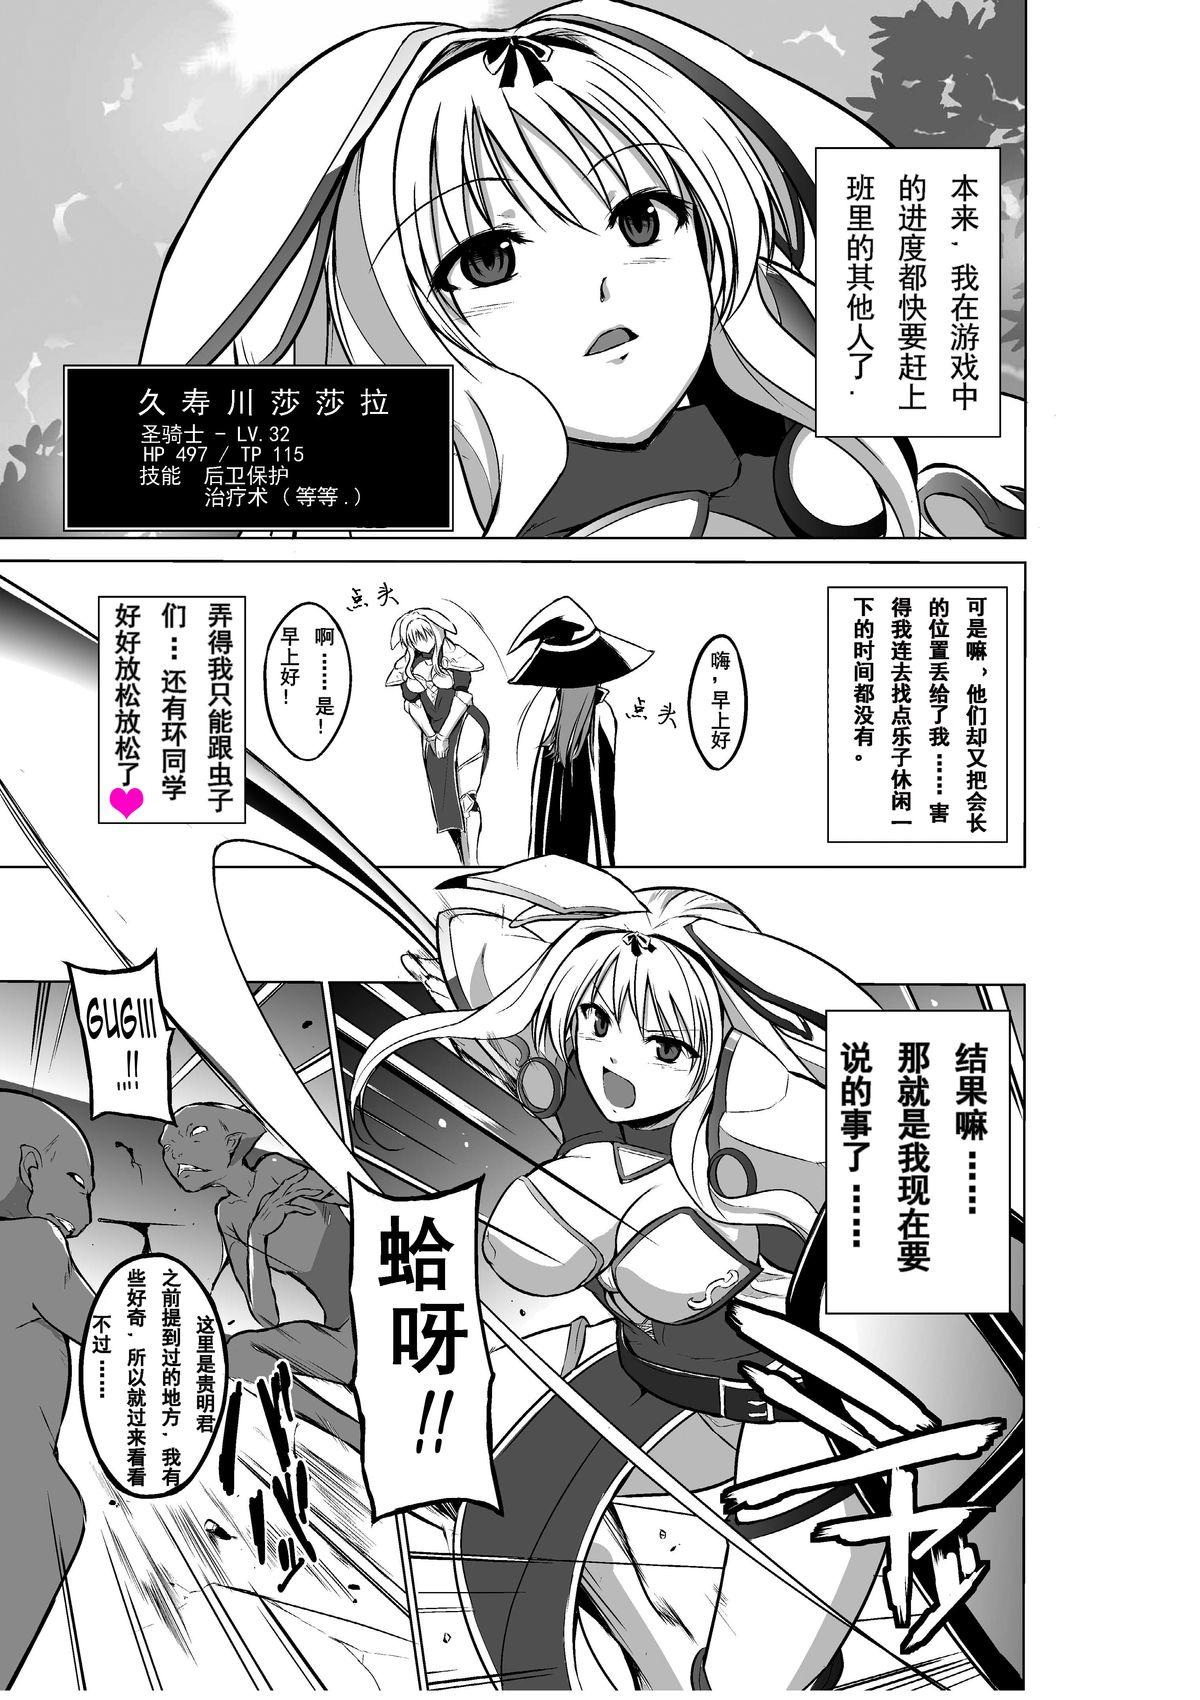 Lady Dungeon Travelers - Sasara no Himegoto 2 - Toheart2 Best Blow Job Ever - Page 3